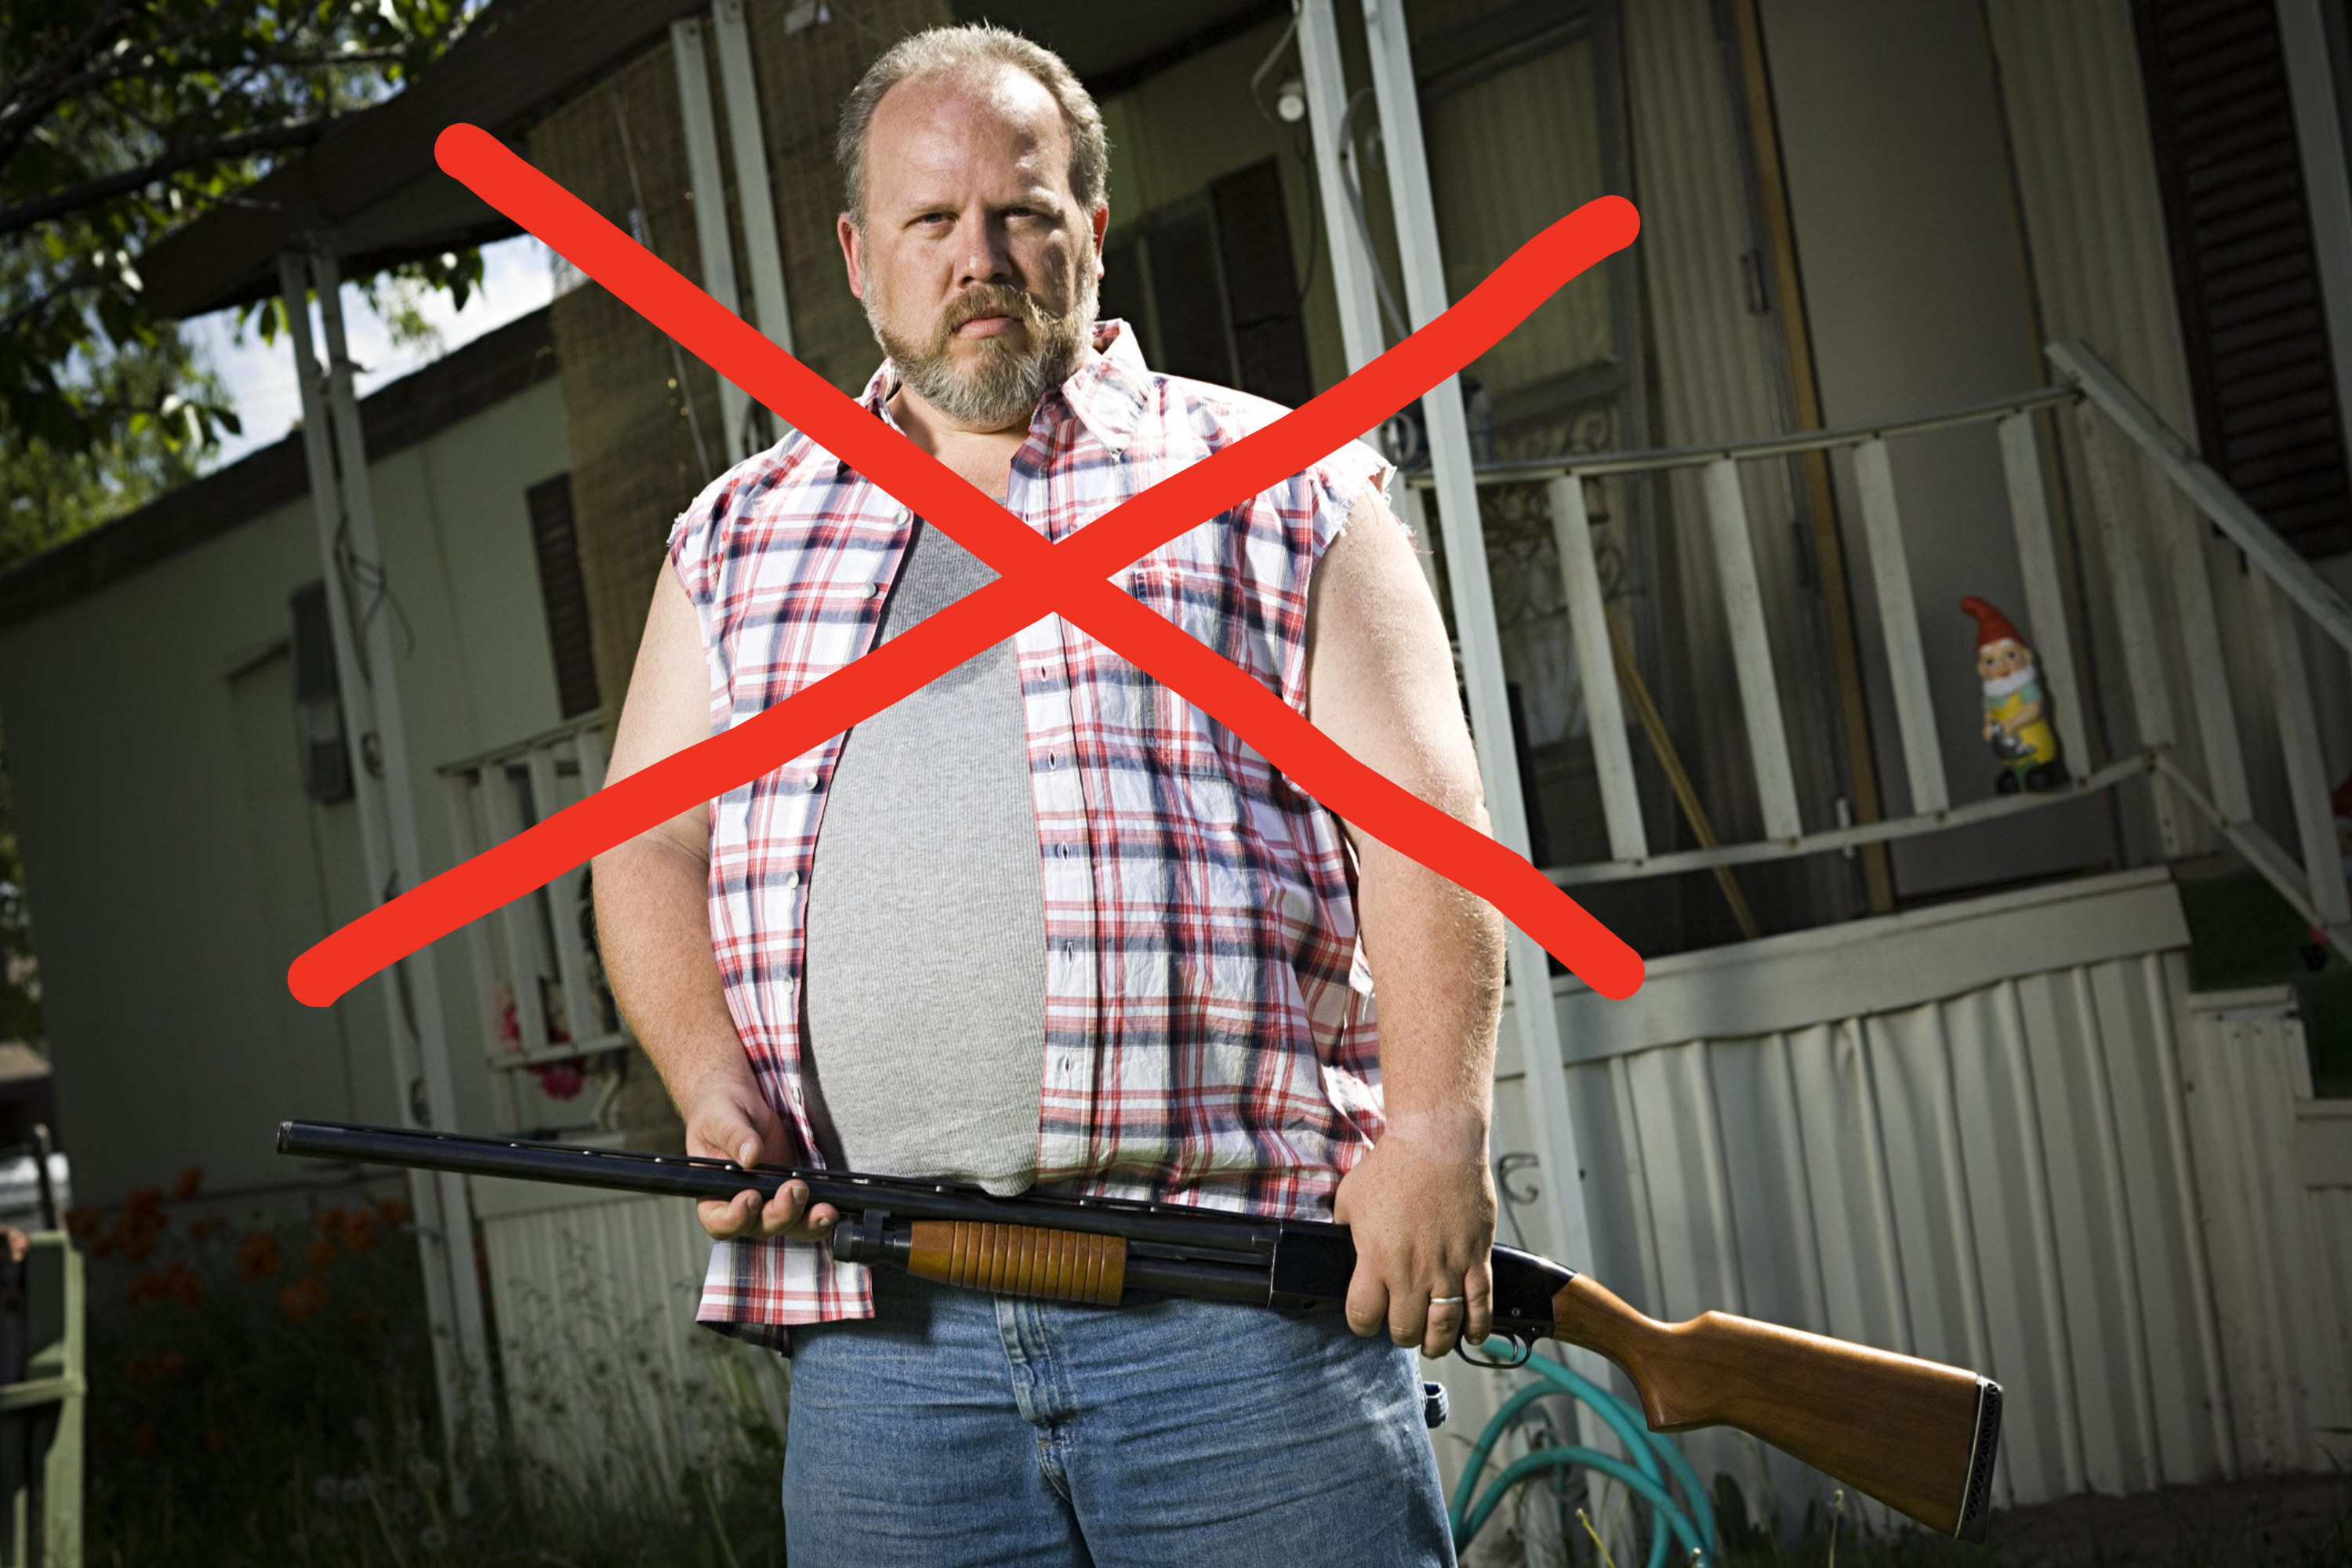 A redneck holding a gun with a big red cross drawn on top of him